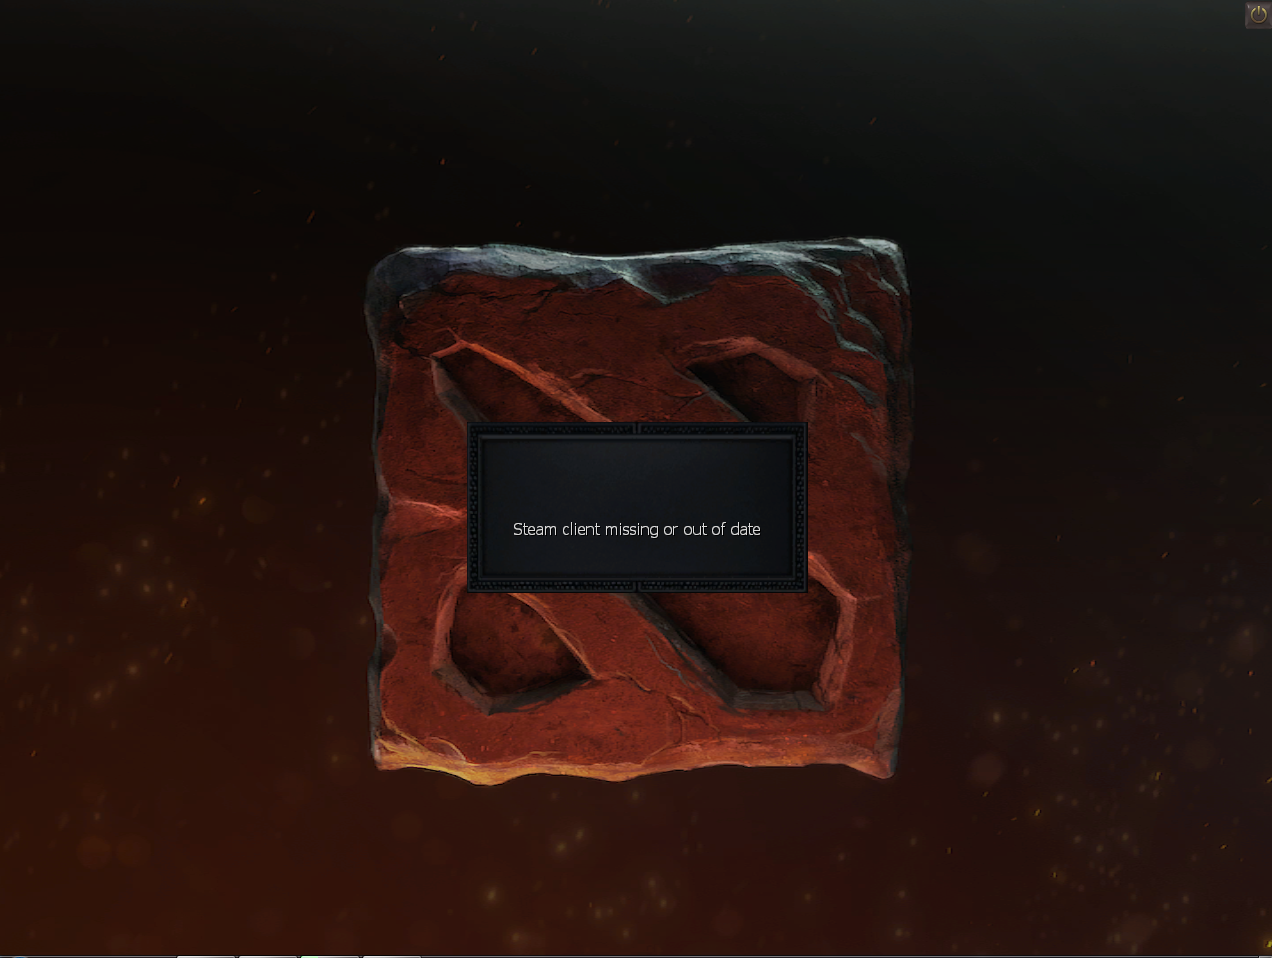 Client missing or out of date dota 2